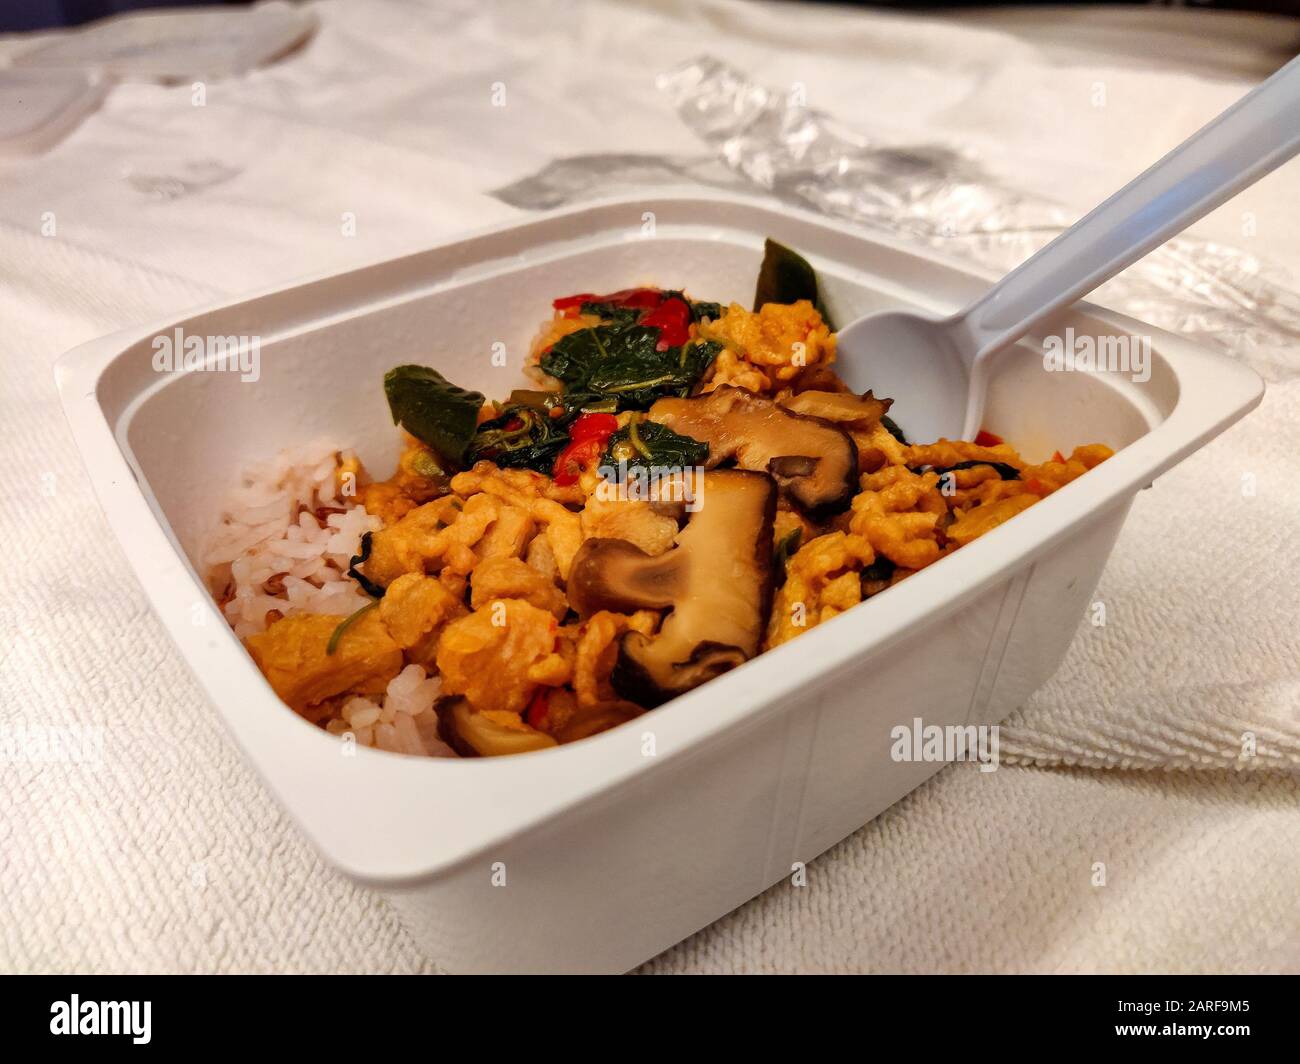 Rice and vegetables served in a plastic box with plastic spoon. Dinner from local store. Ready to eat Pre-Packed frozen food. Stock Photo